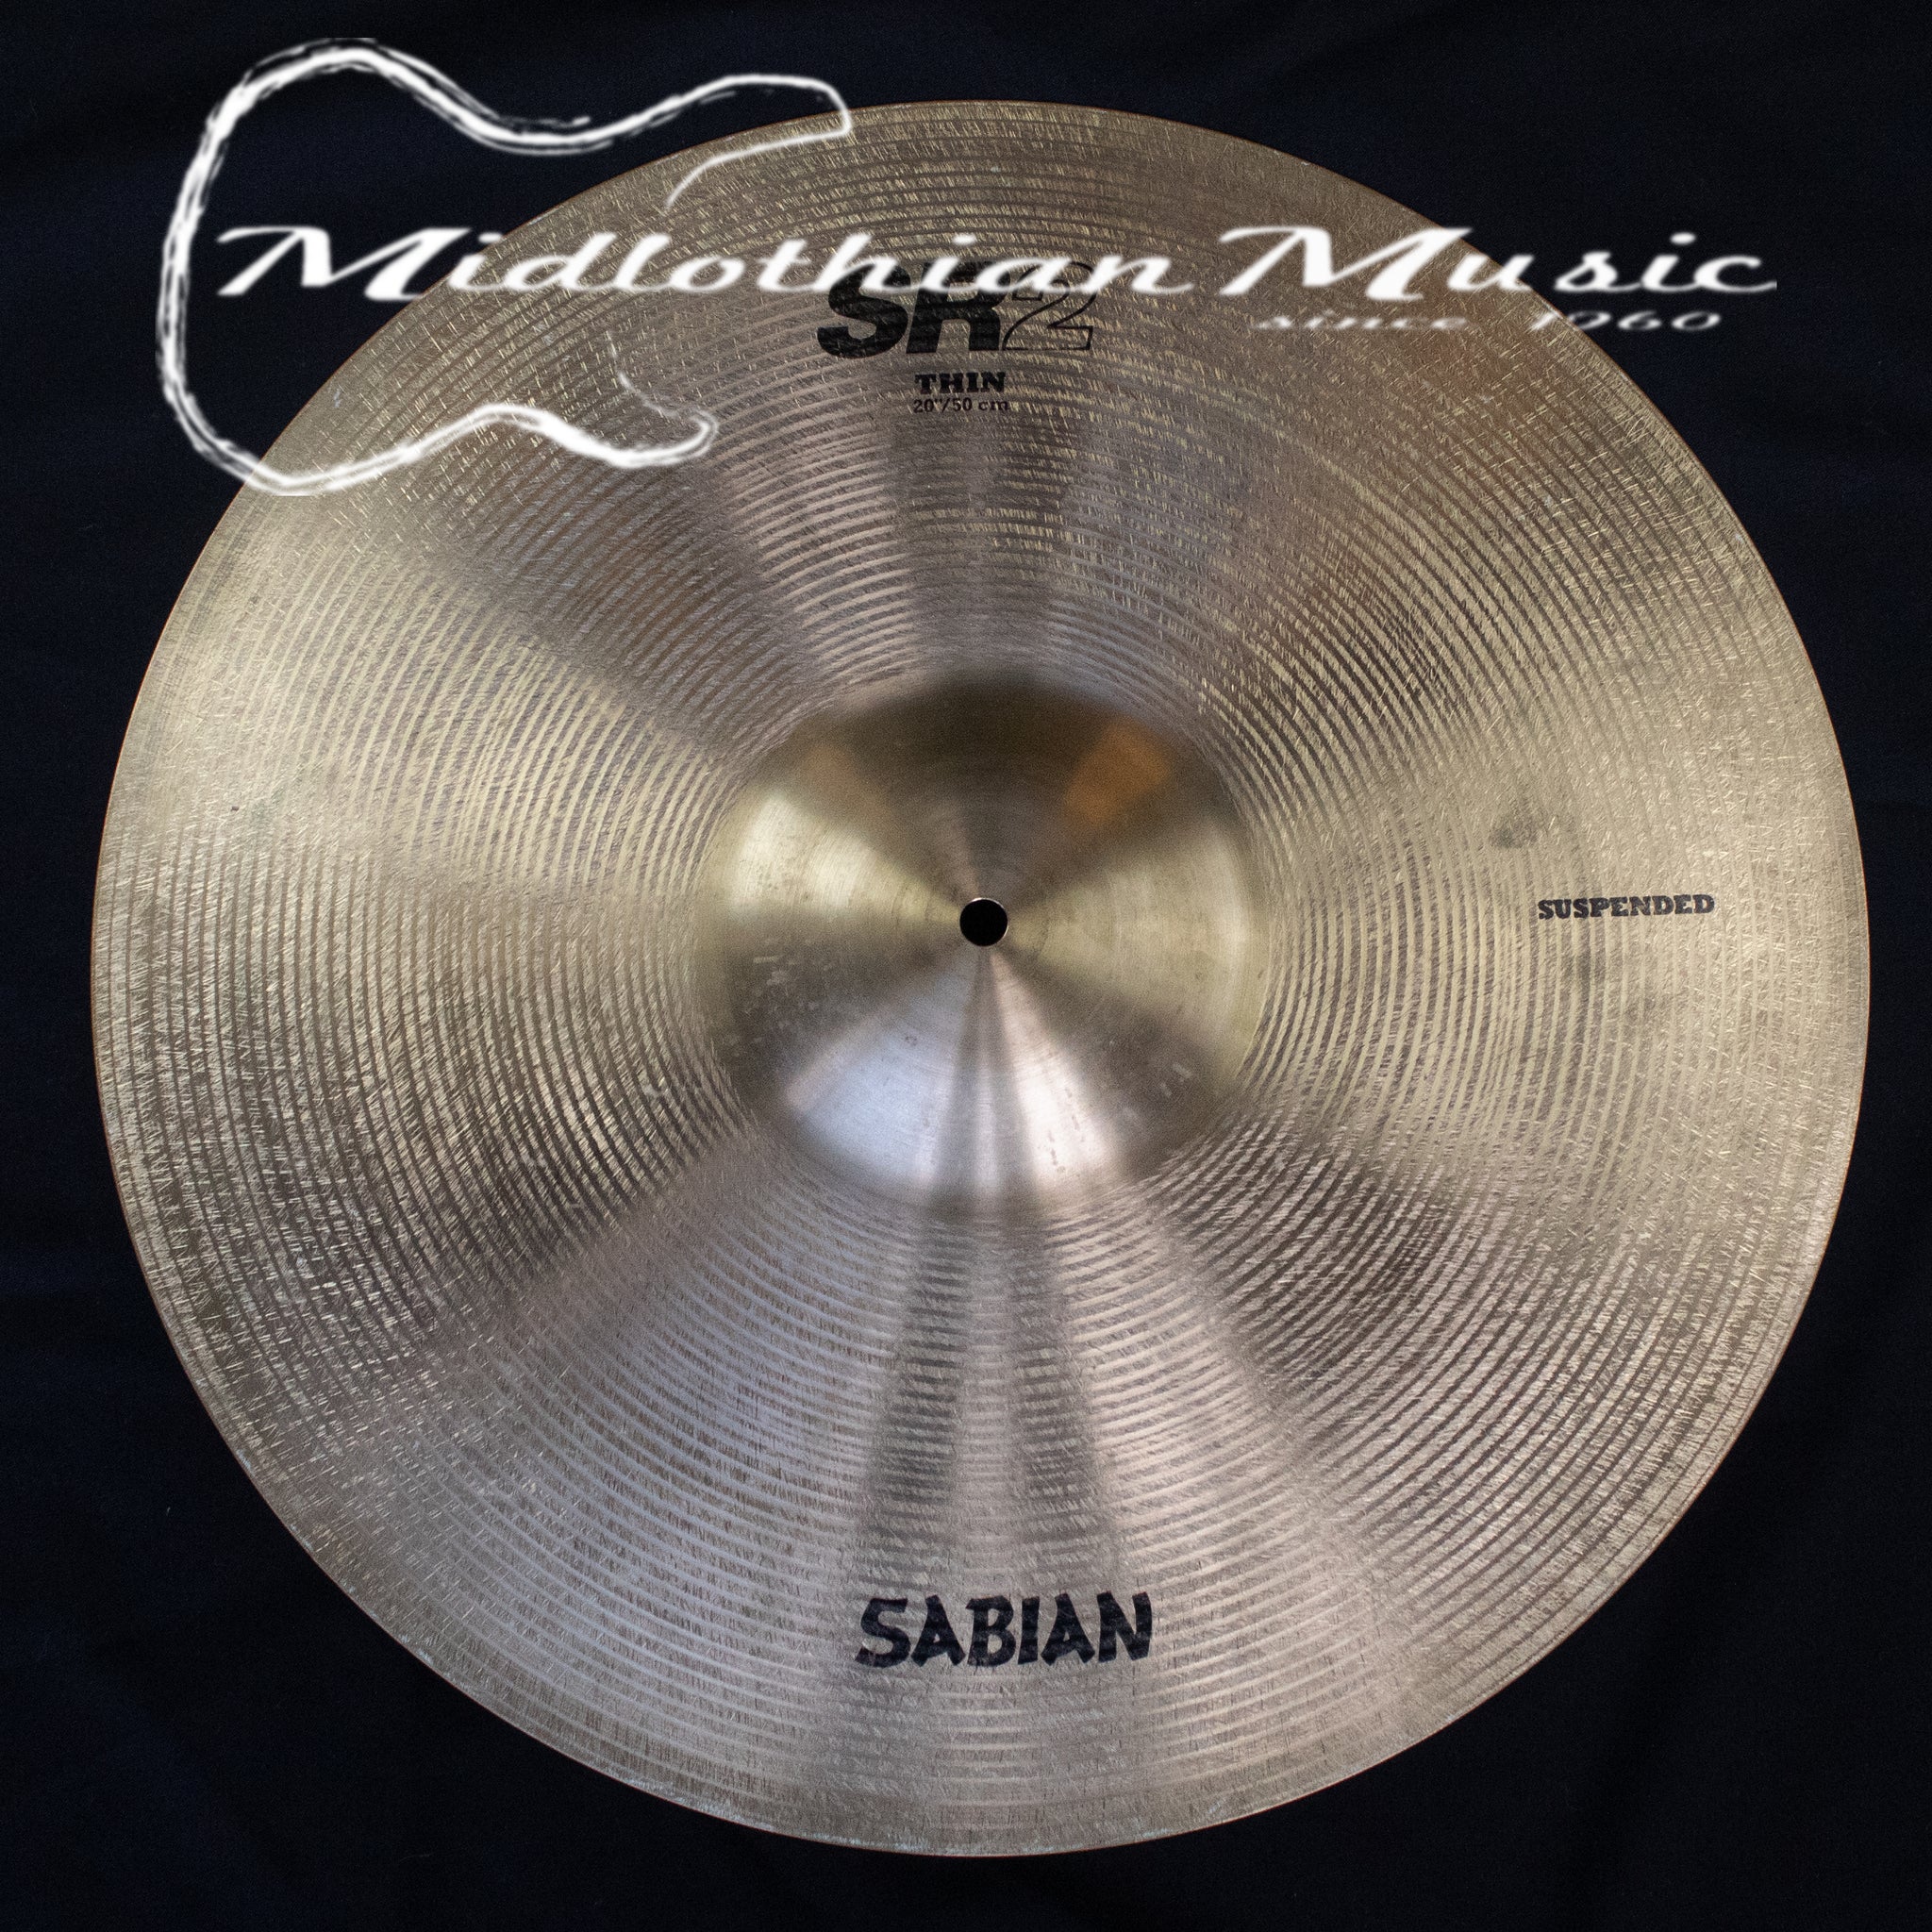 Sabian SR2 Thin 20" Suspended Cymbal USED